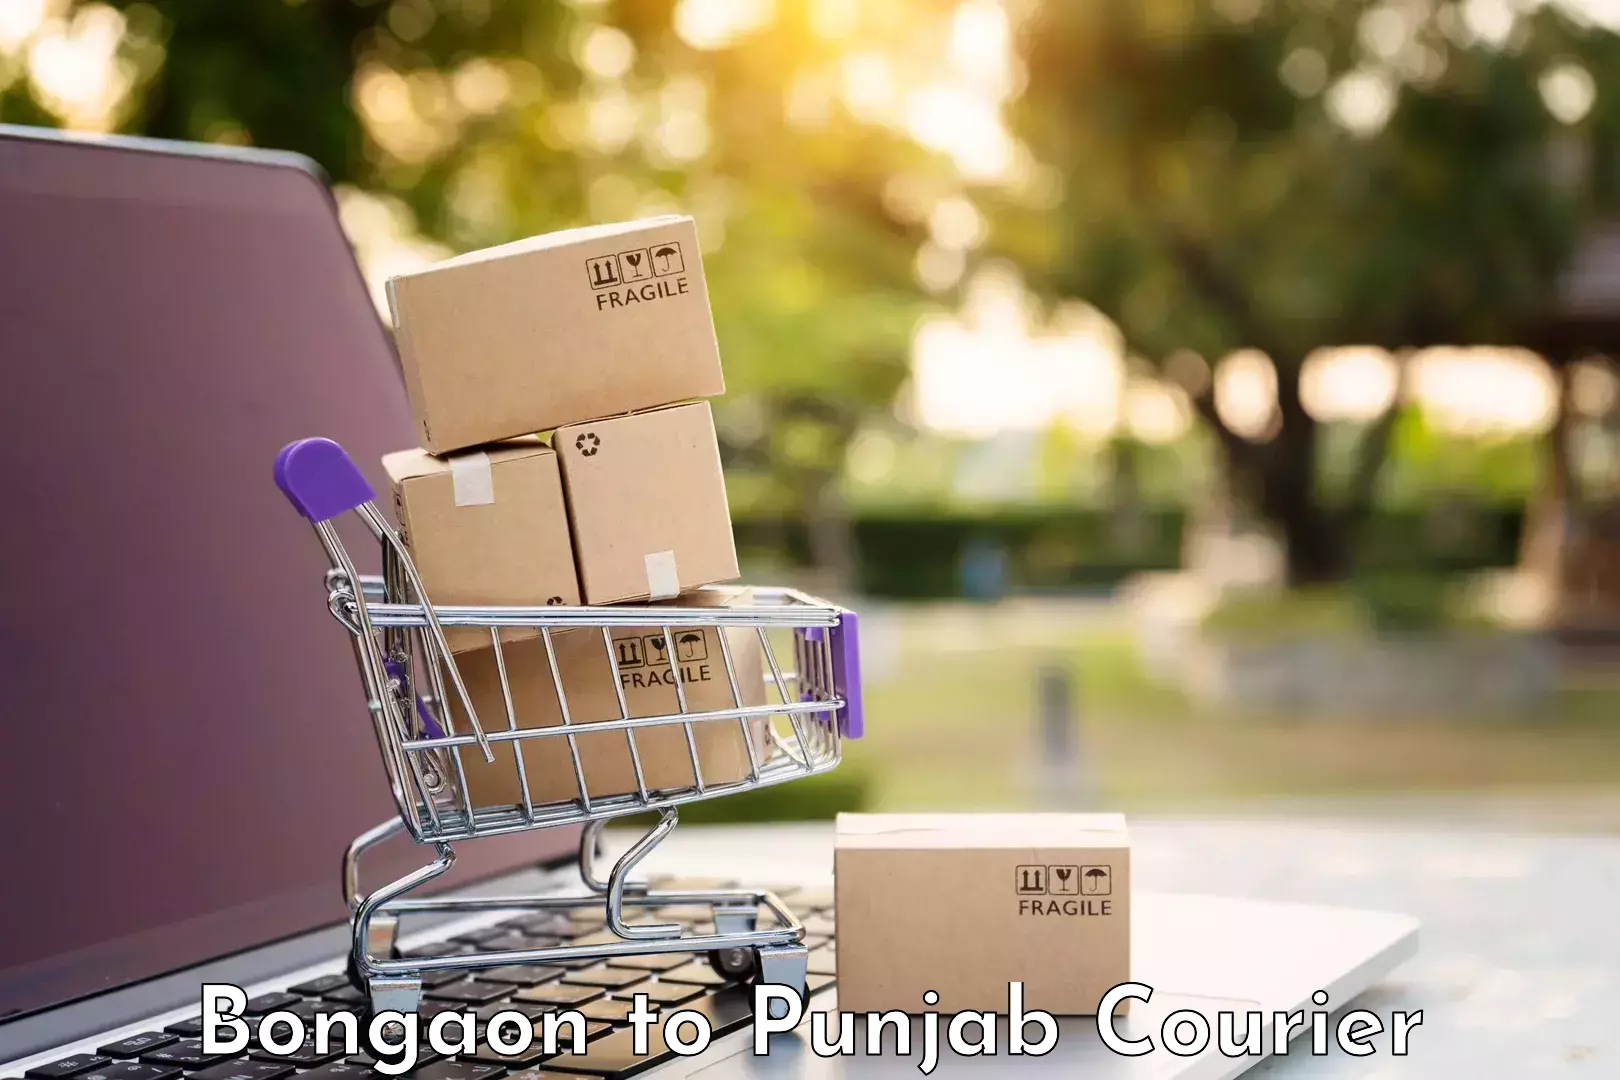 Instant baggage transport quote Bongaon to Faridkot